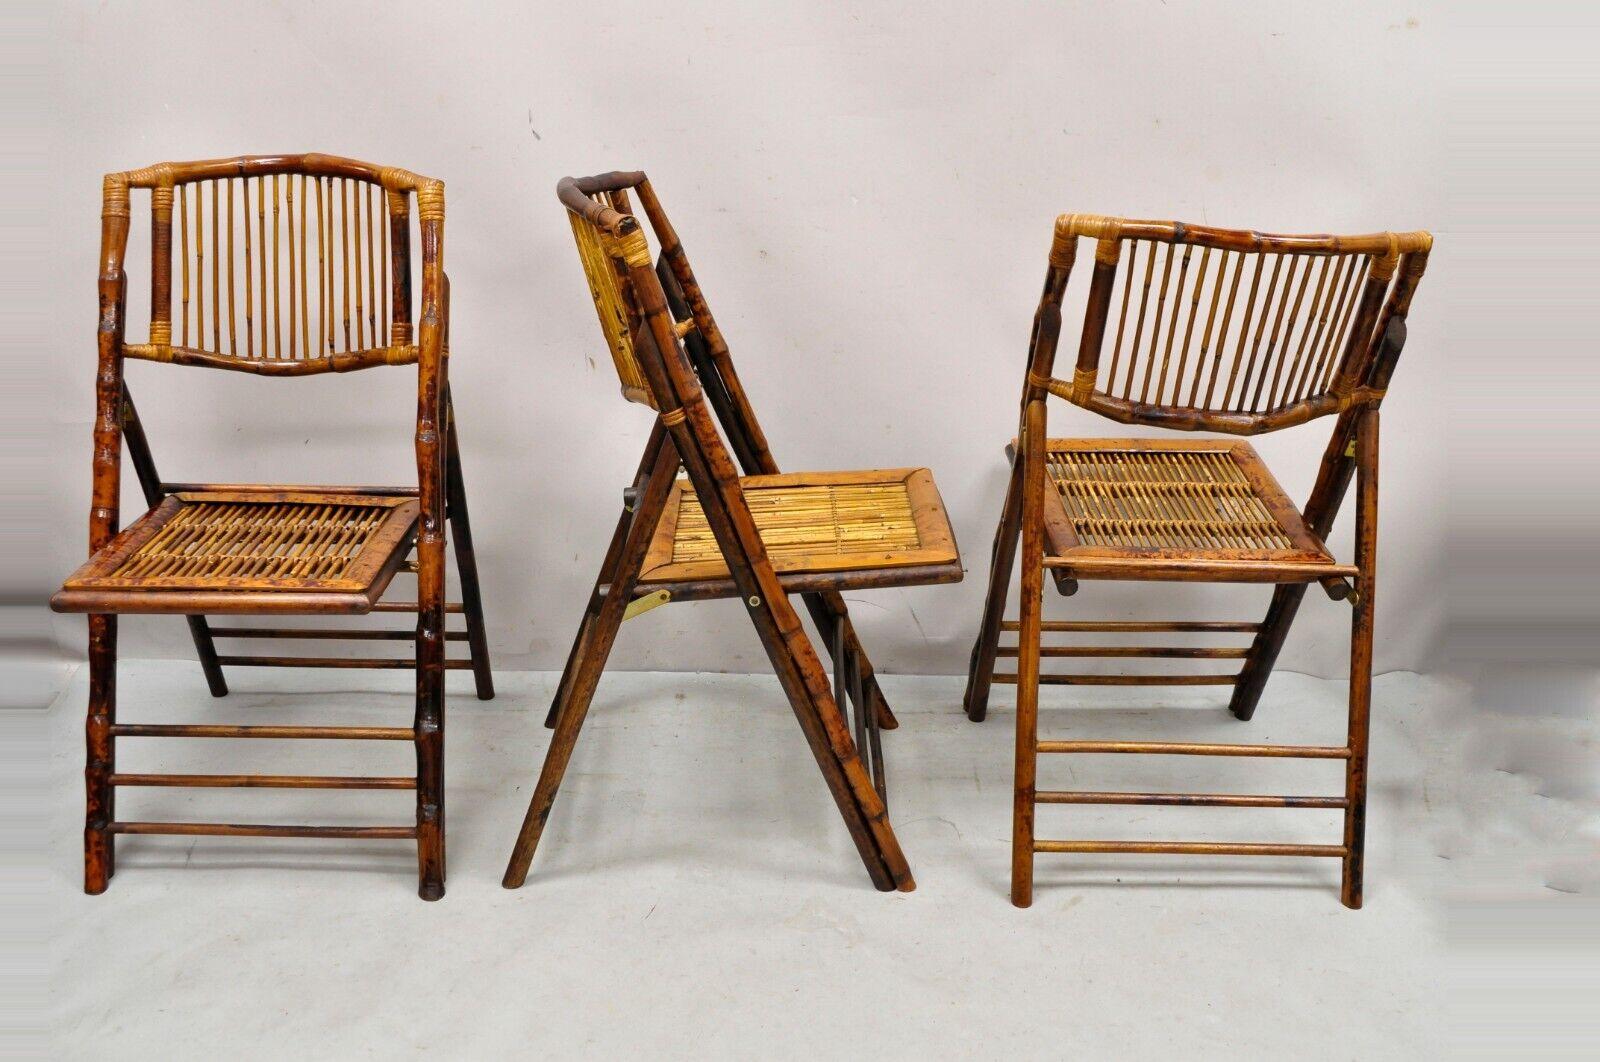 Bamboo wooden folding chairs for game table or events - set of 4. Item features (4) folding side chairs, bamboo wooden construction, very nice vintage set, great style and form. Circa mid to late 20th century.
Measurements: 
Open: 35